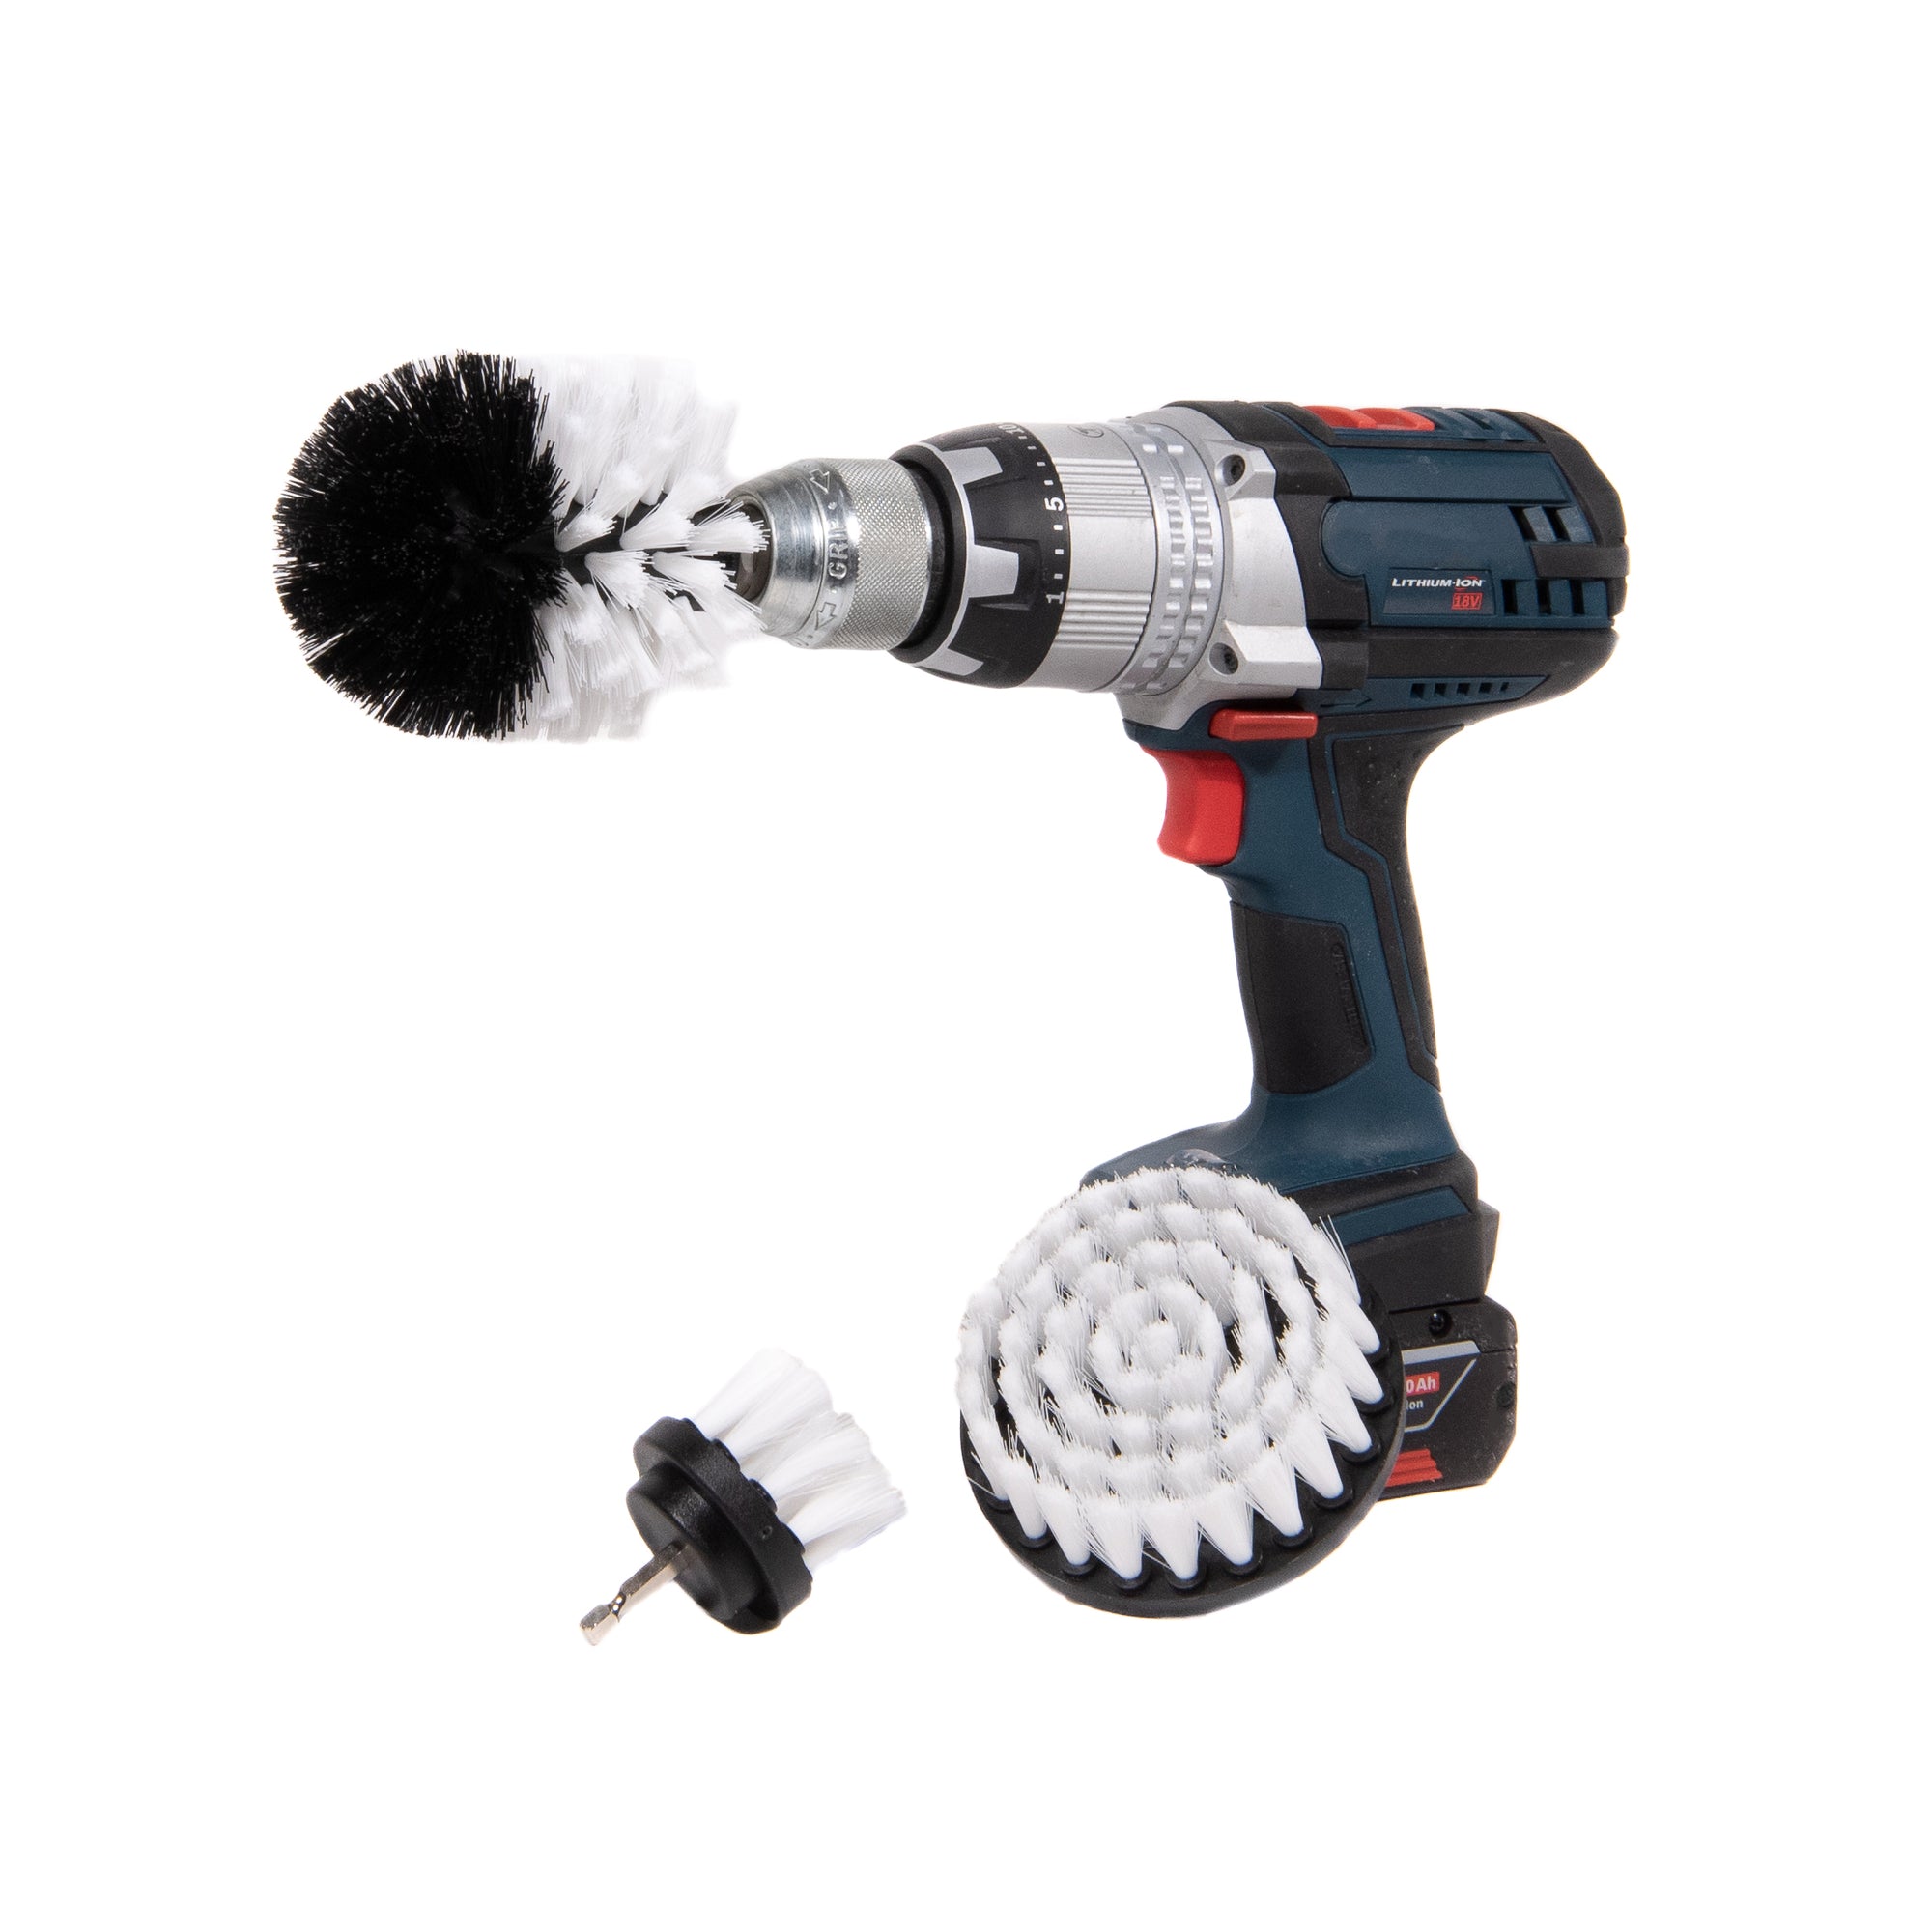 Electric Drill Brushes, Drill Brush Set: Power Scrub Away Grime